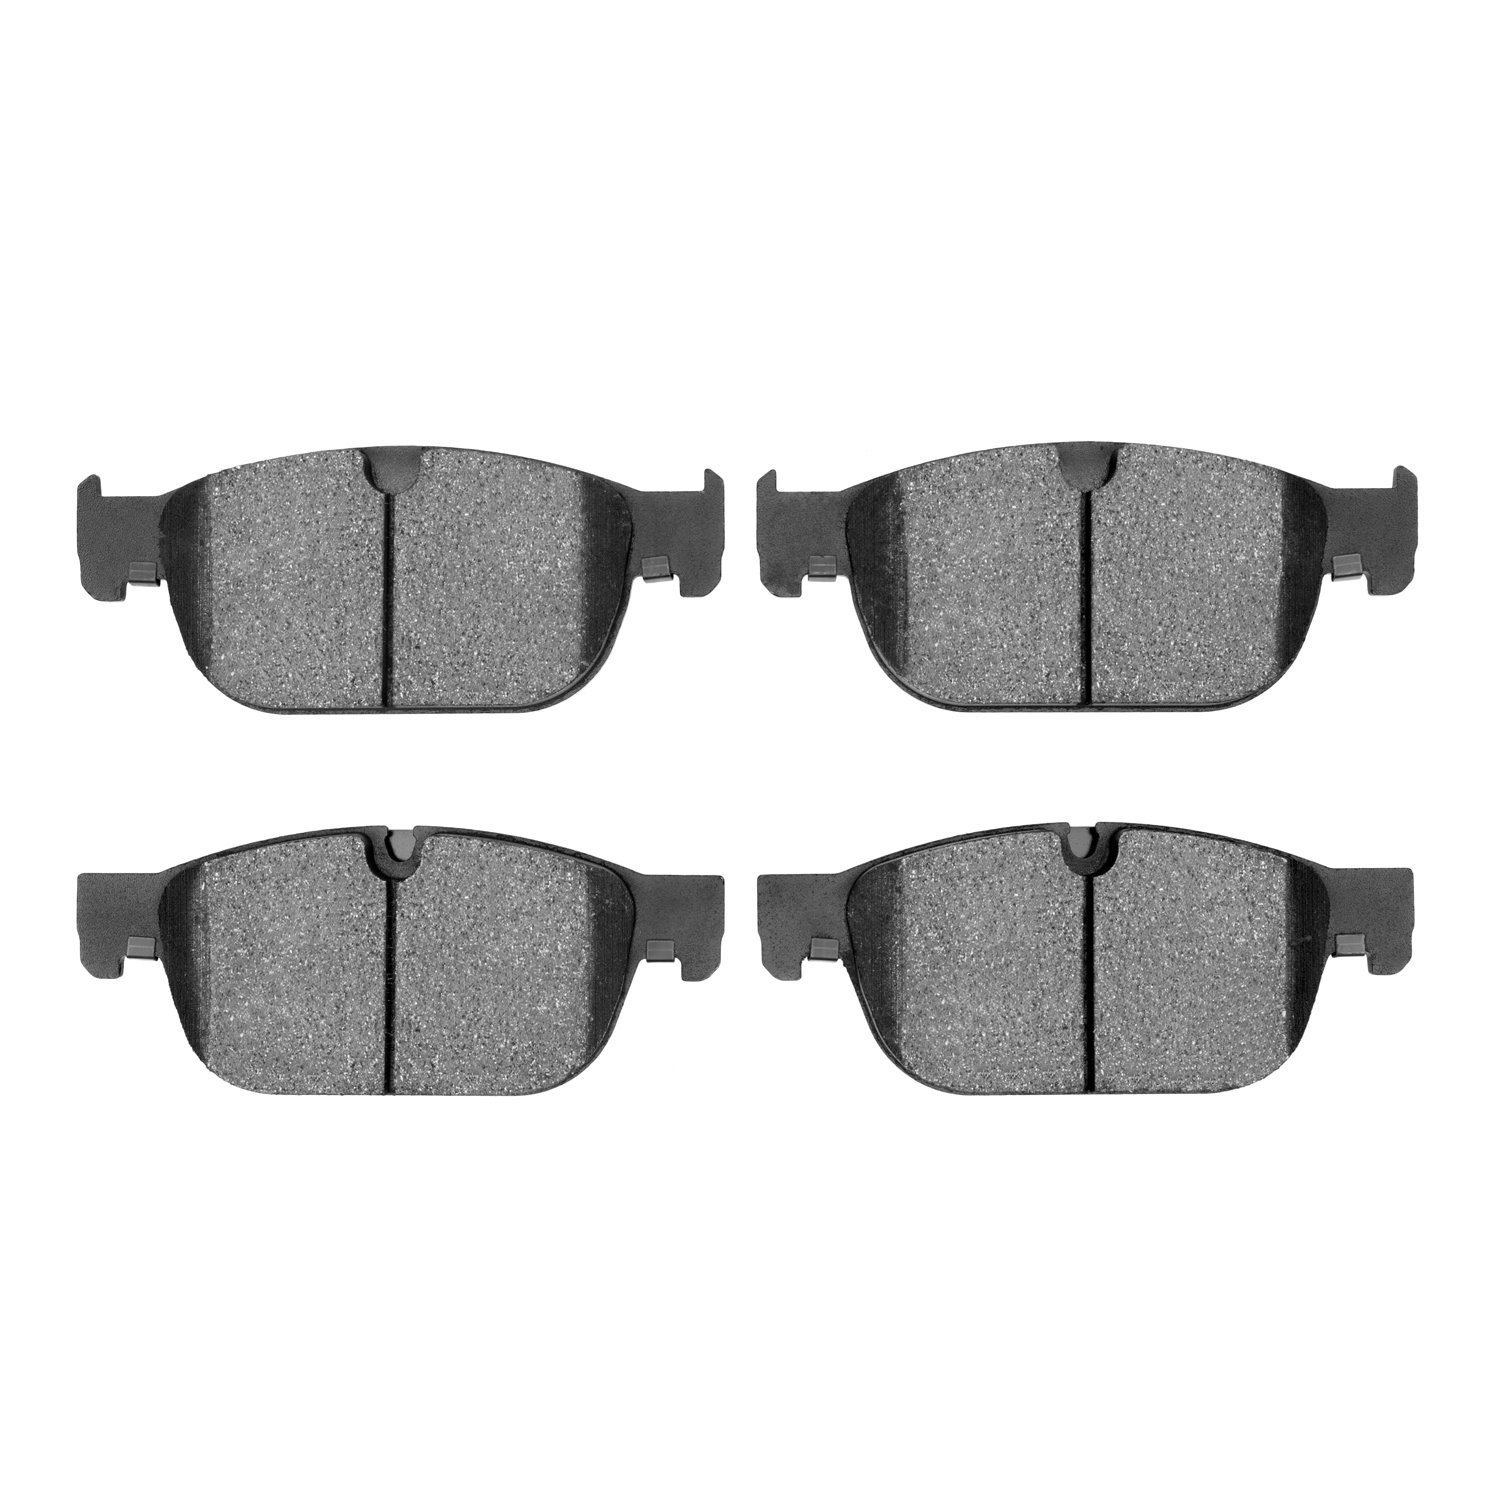 Euro Ceramic Brake Pads, Fits Select Fits Multiple Makes/Models, Position: Front